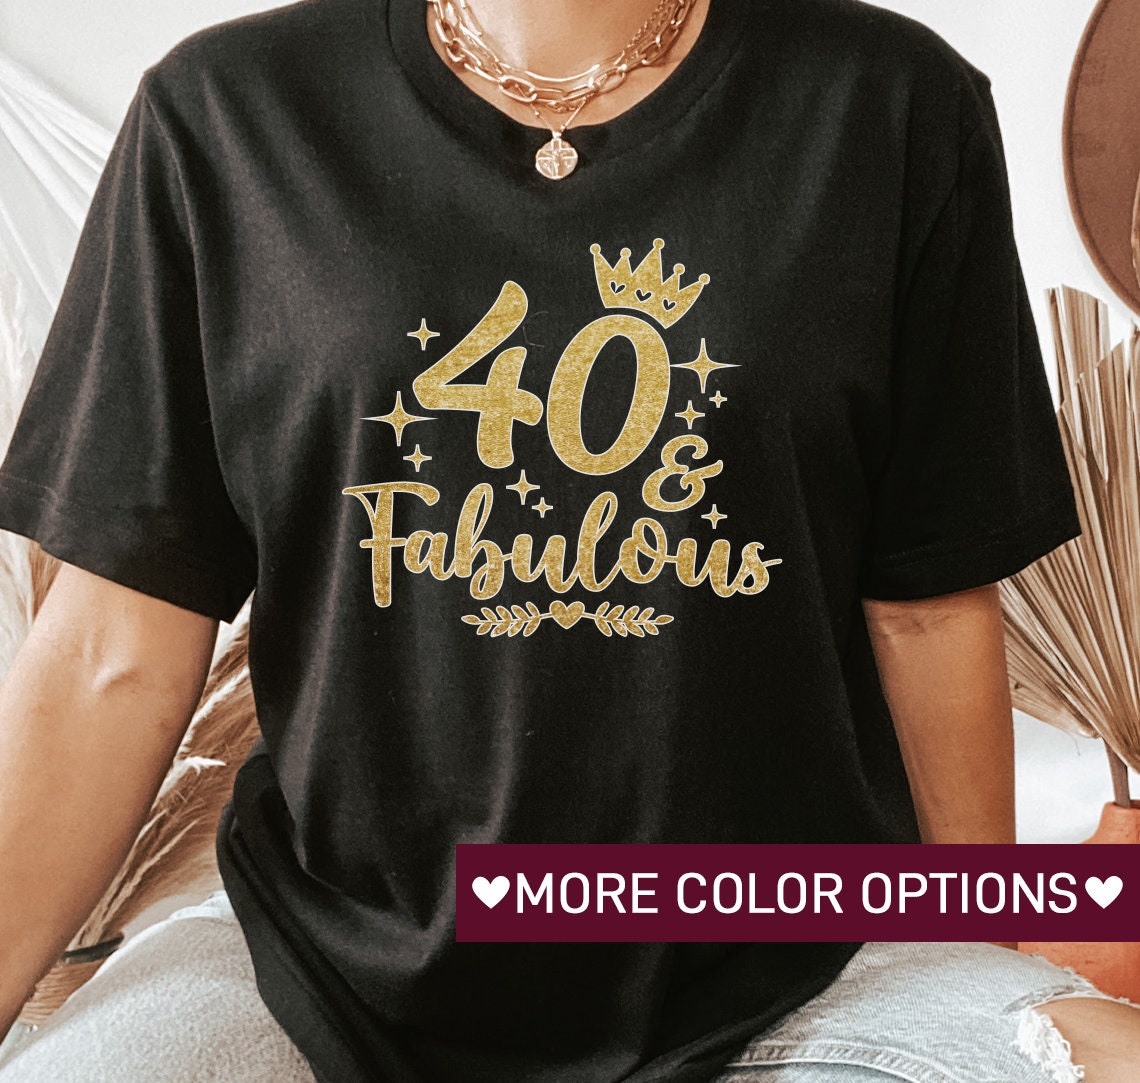 Discover 40th Birthday Shirt for Women, 40 and Fabulous TShirt for 40th Birthday T-Shirt